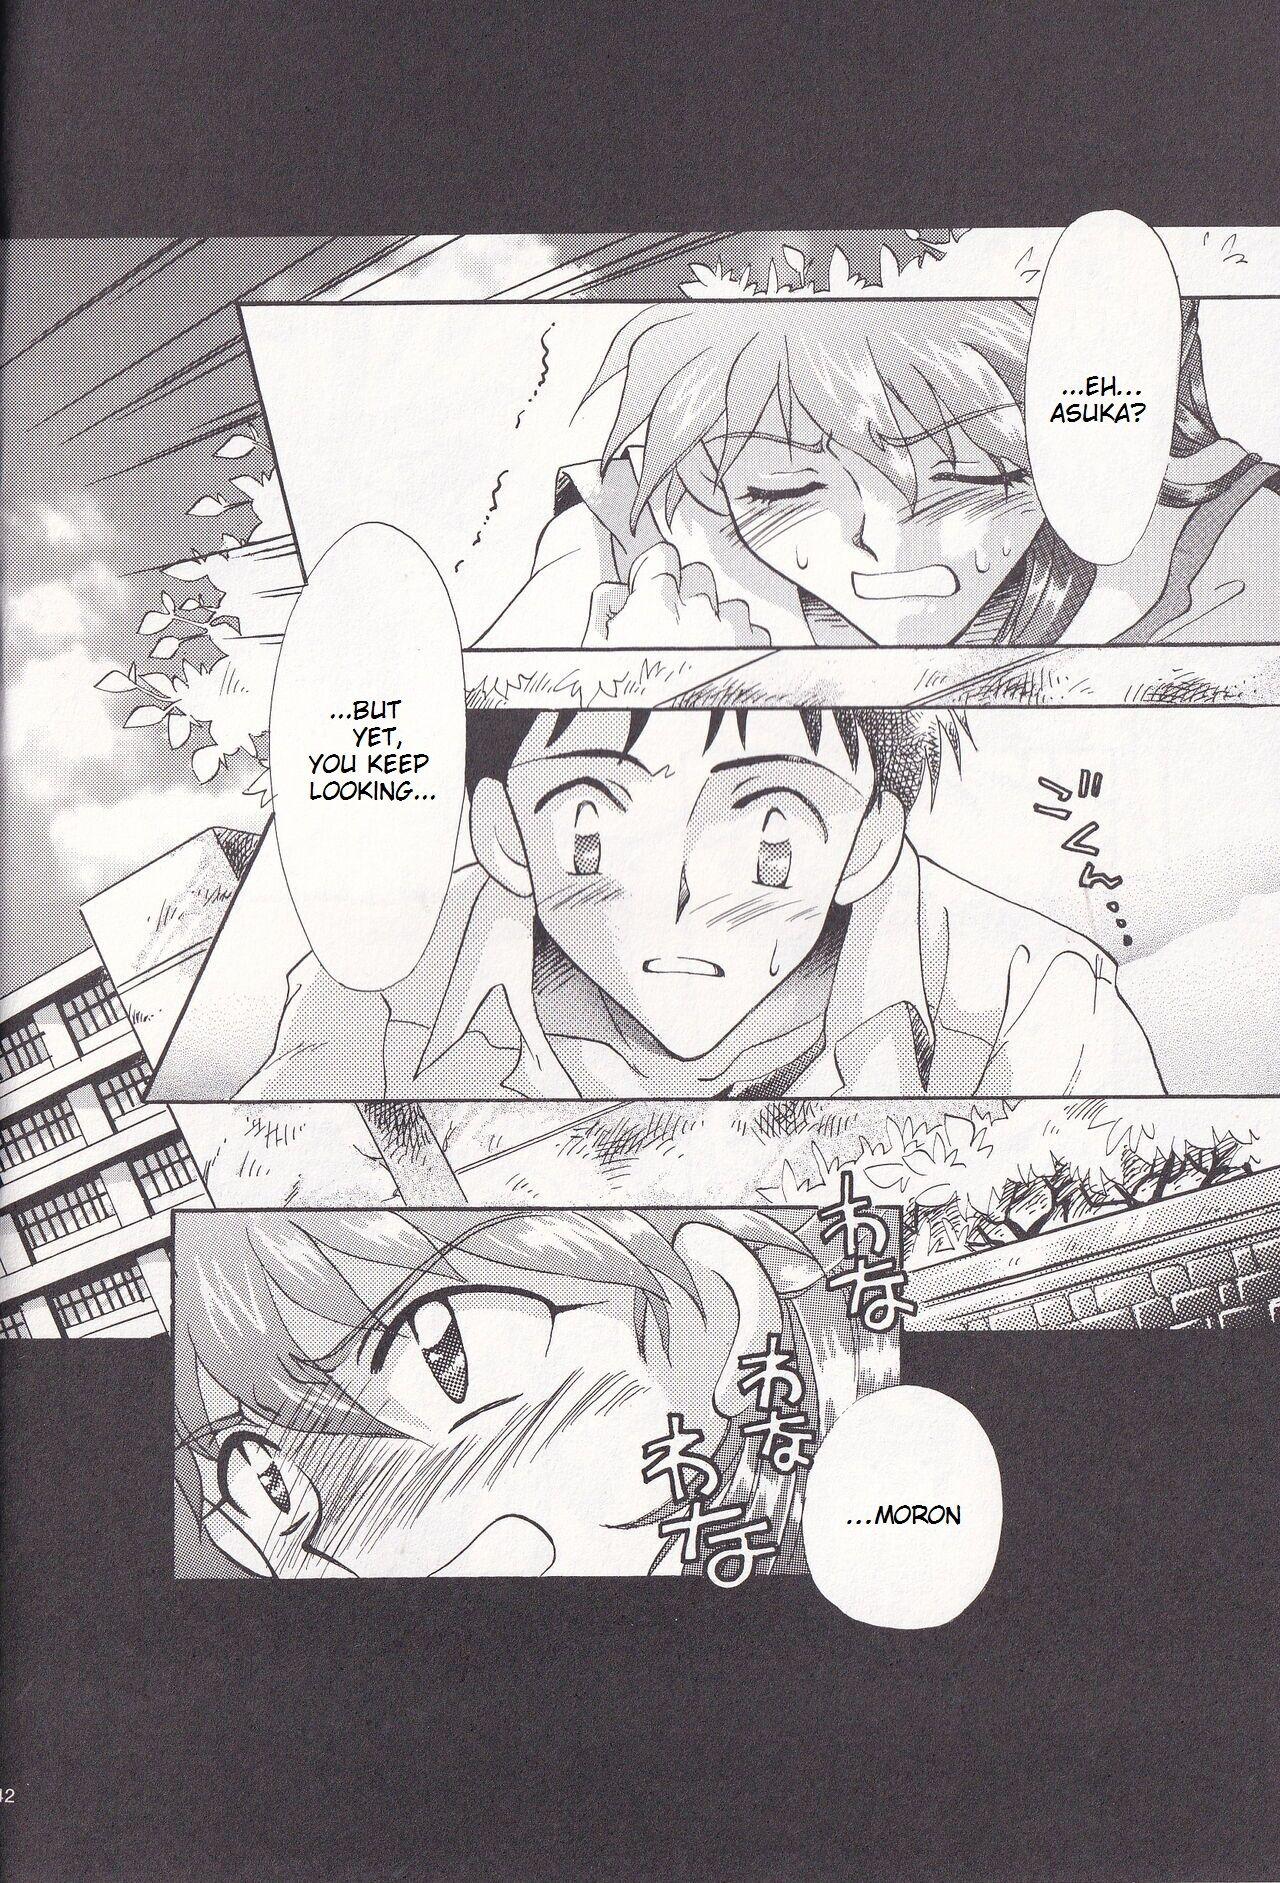 Hard Cock Close your eyes Episode 0:4 - Neon genesis evangelion Anale - Page 8